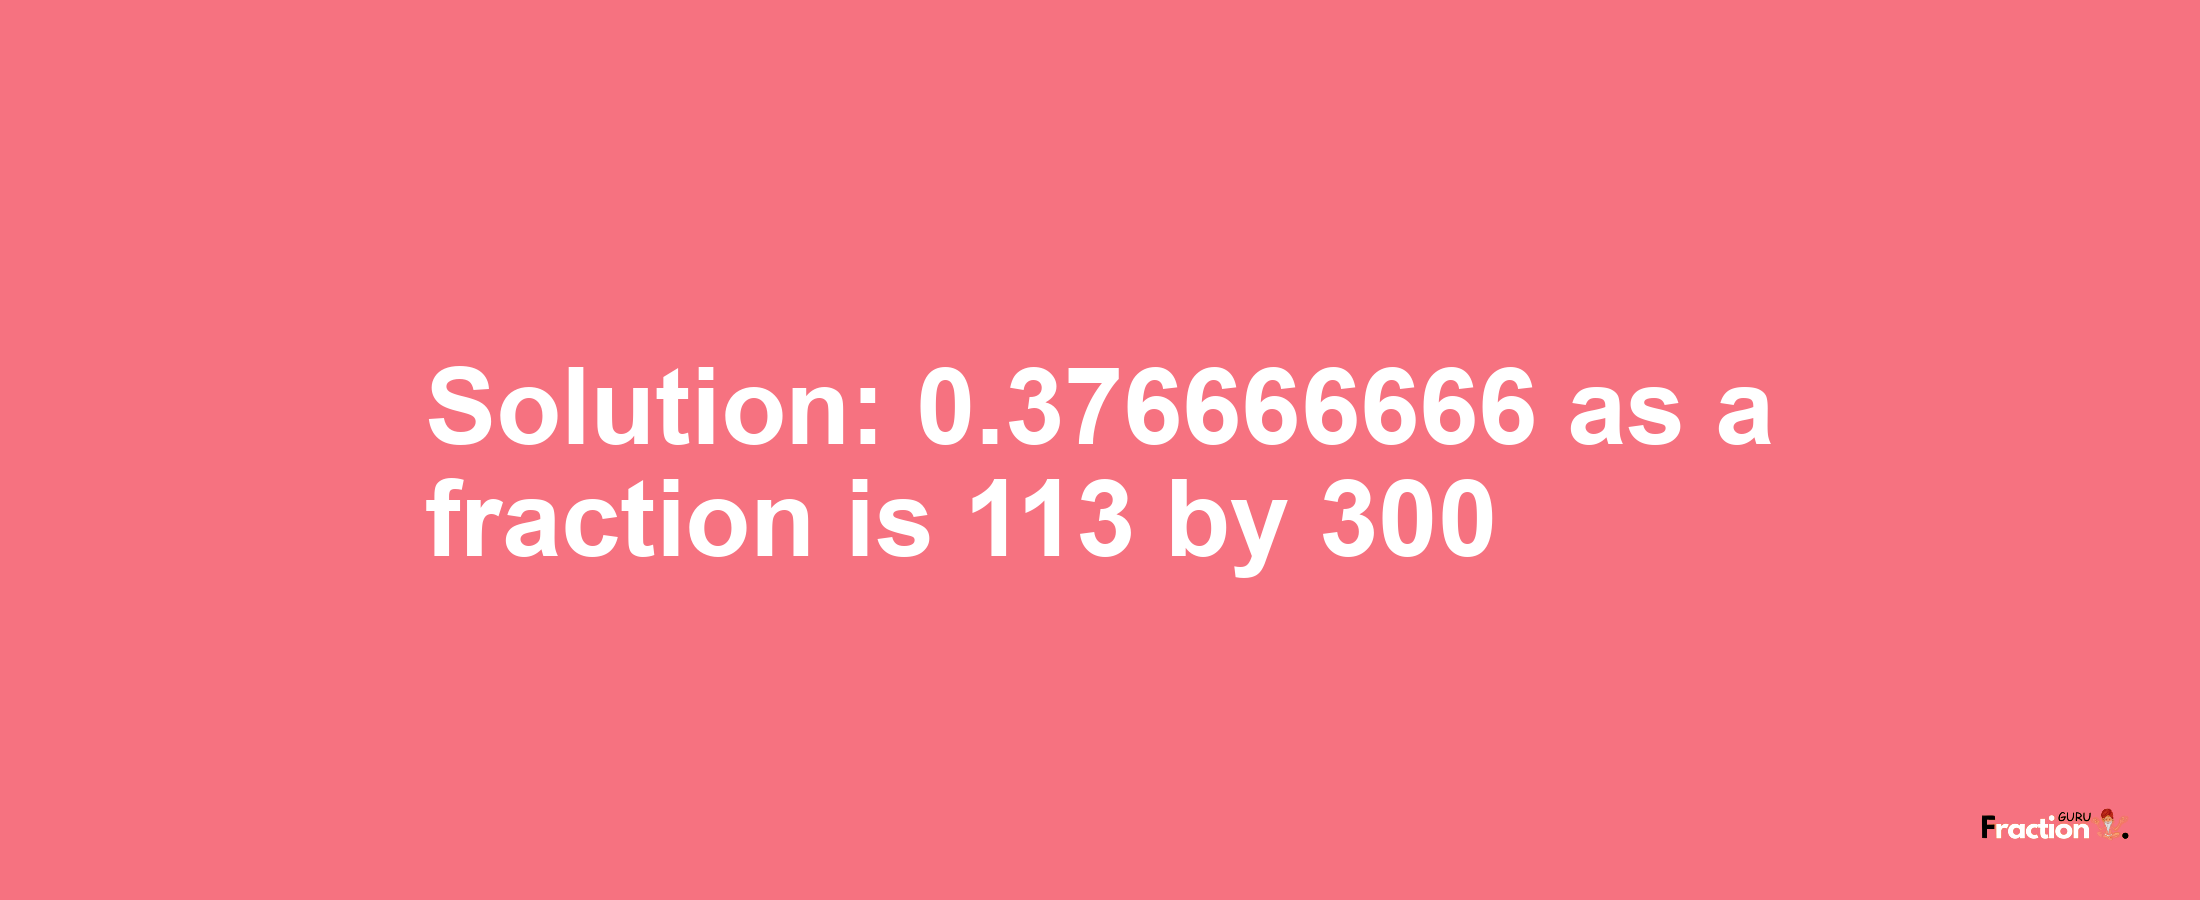 Solution:0.376666666 as a fraction is 113/300